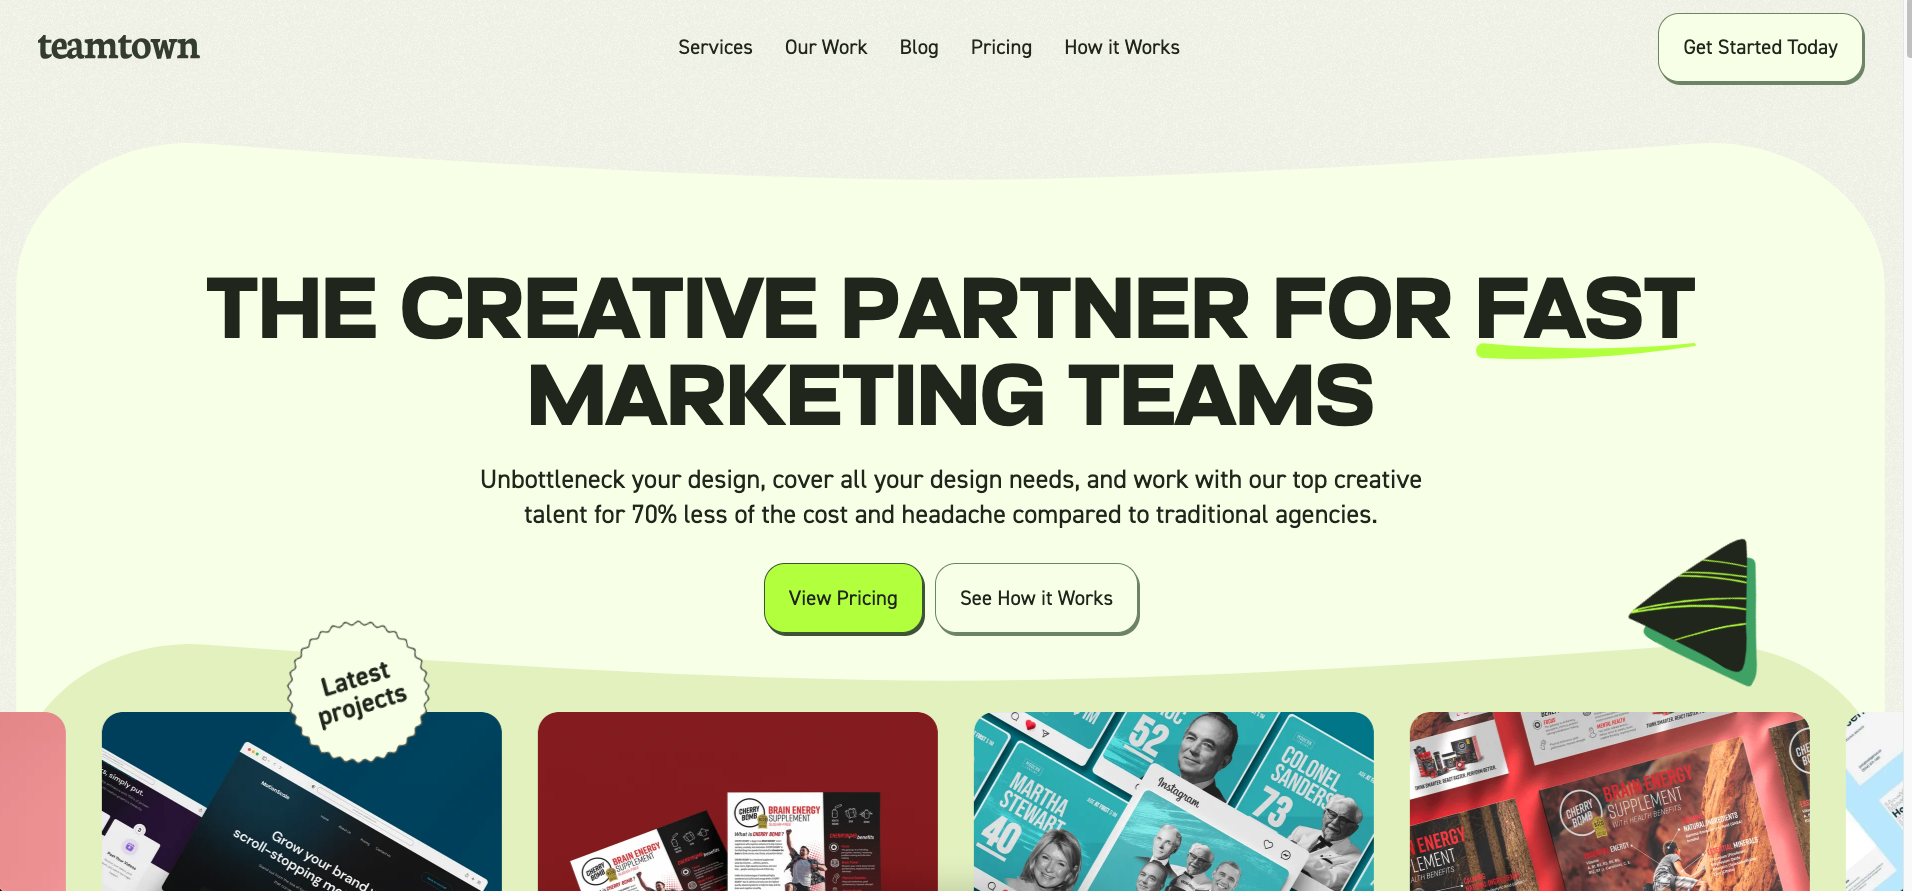 Teamtown.co Teamtown Landing Page